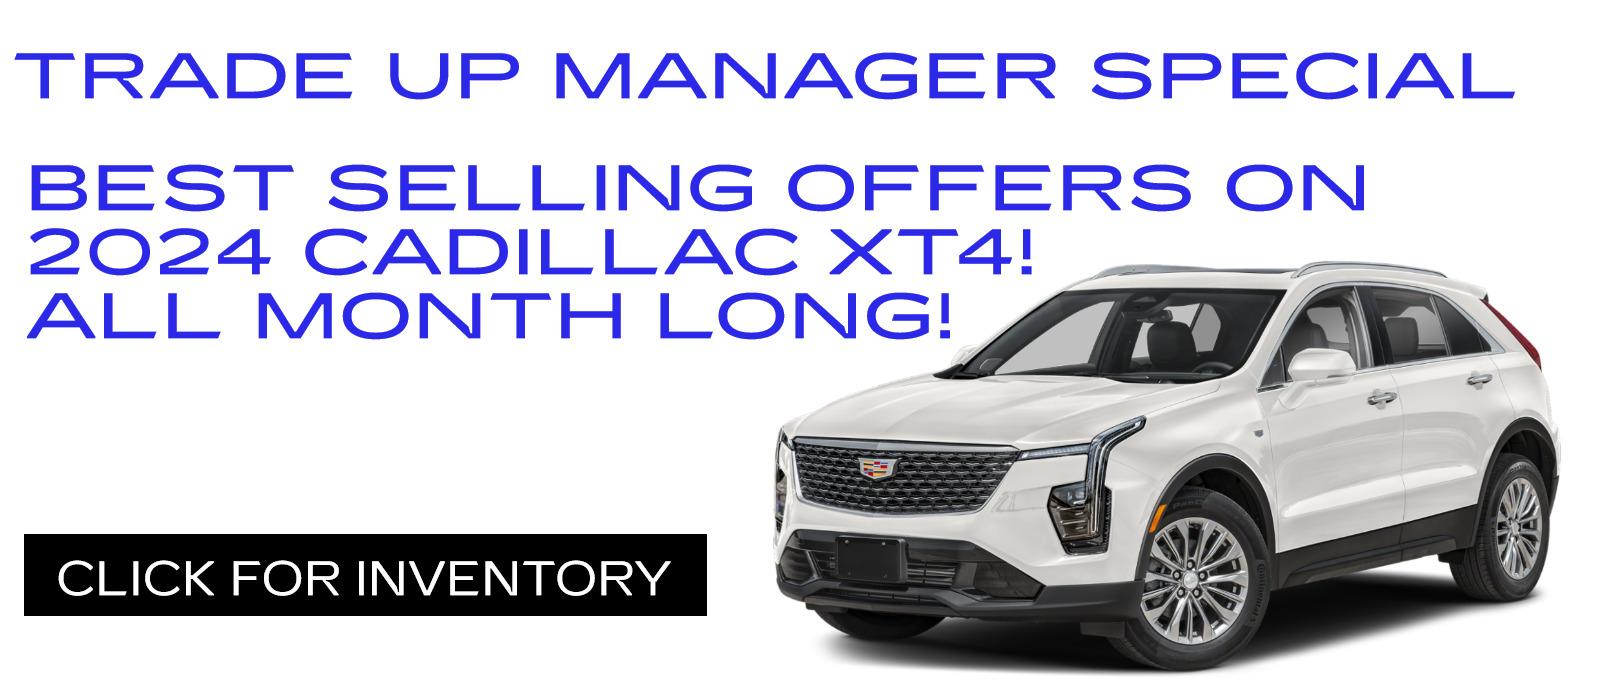 Trade Up Manager Special
Best Selling Offers All Month Long!
At Prestige Cadillac